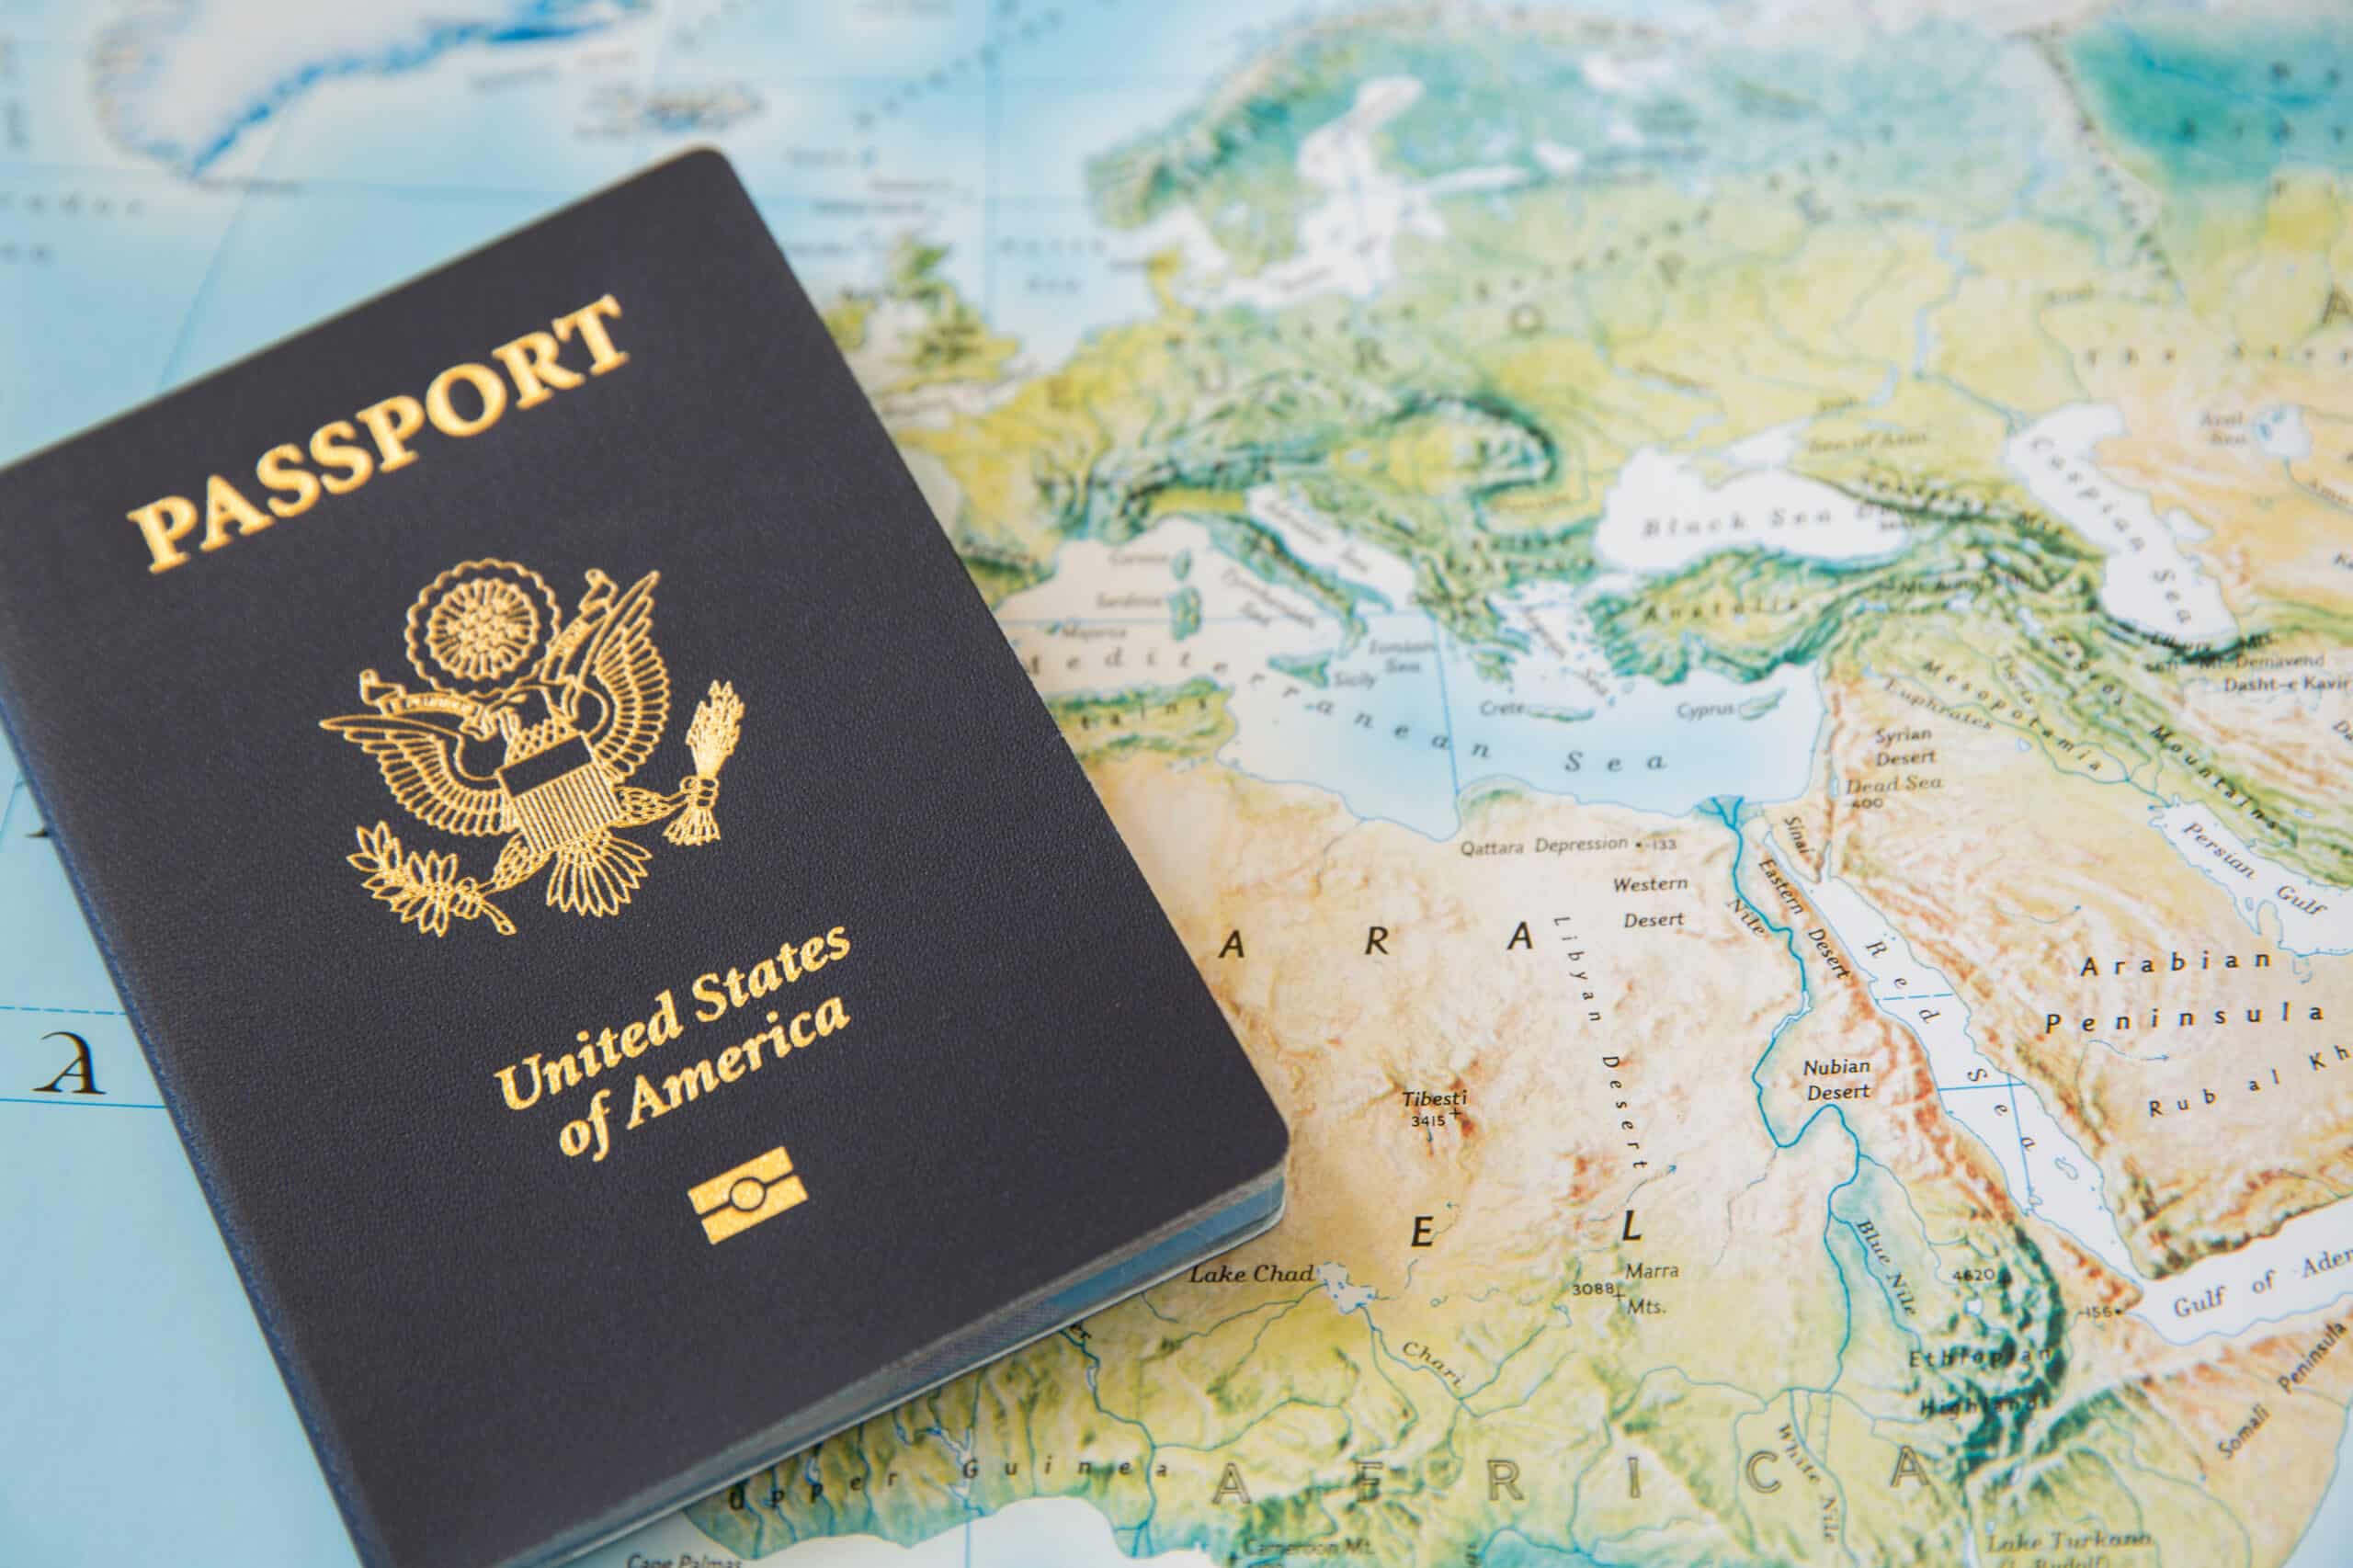 5 Things to Know When Getting a Passport Photo